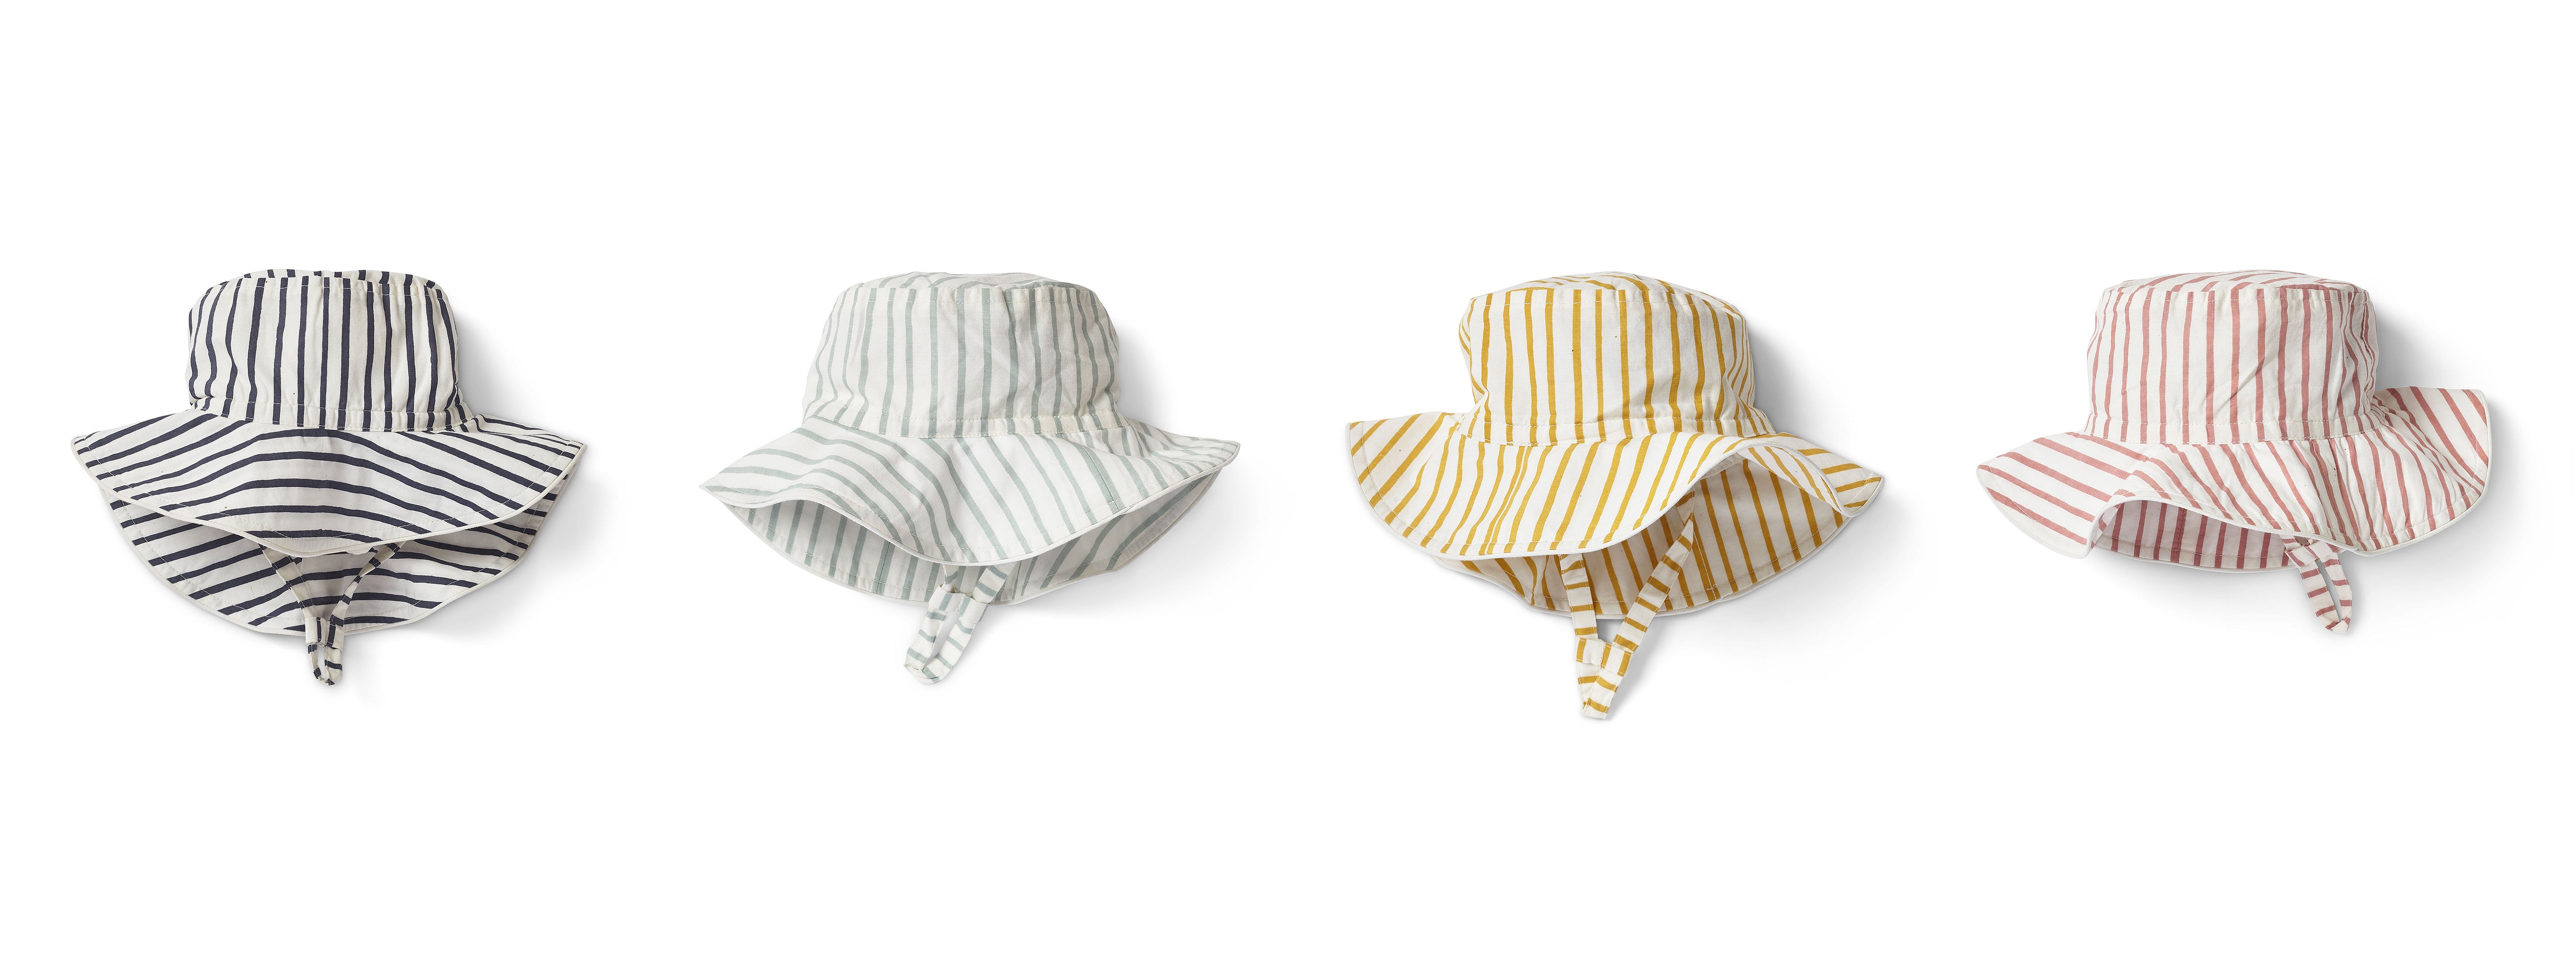 baby toddler hats